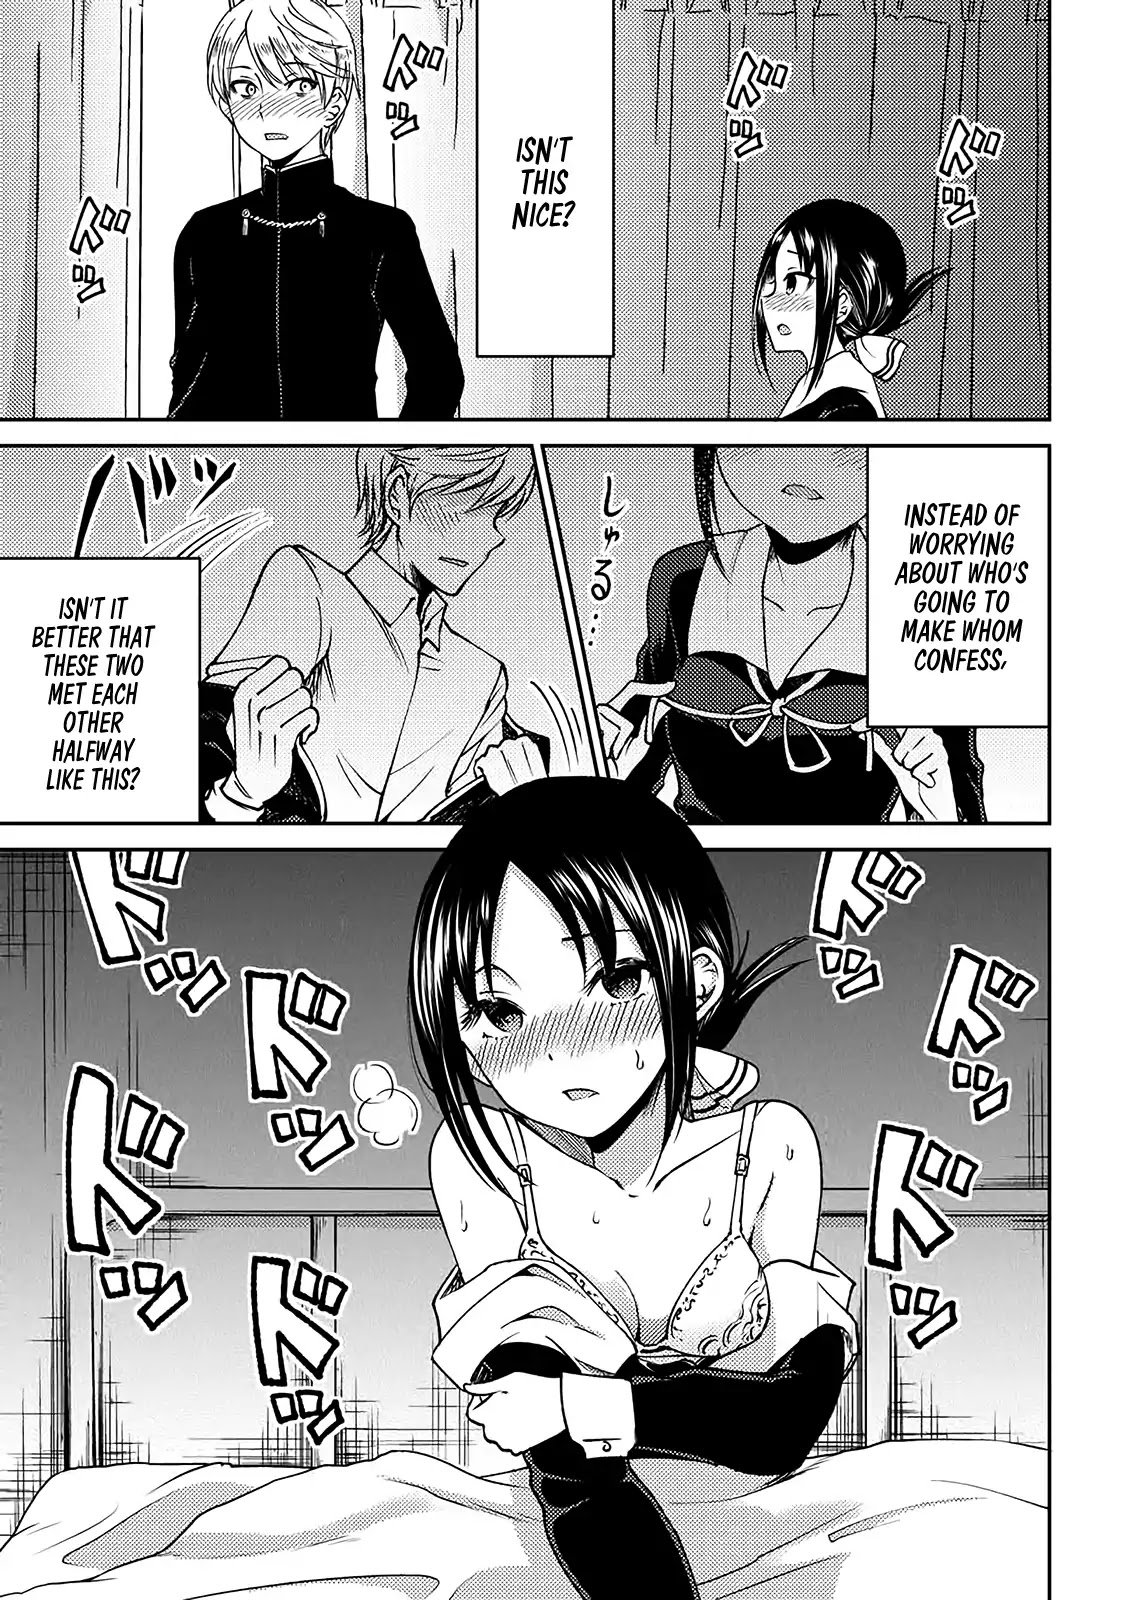 kaguya-wants-to-be-confessed-to-official-doujin-chap-3-16